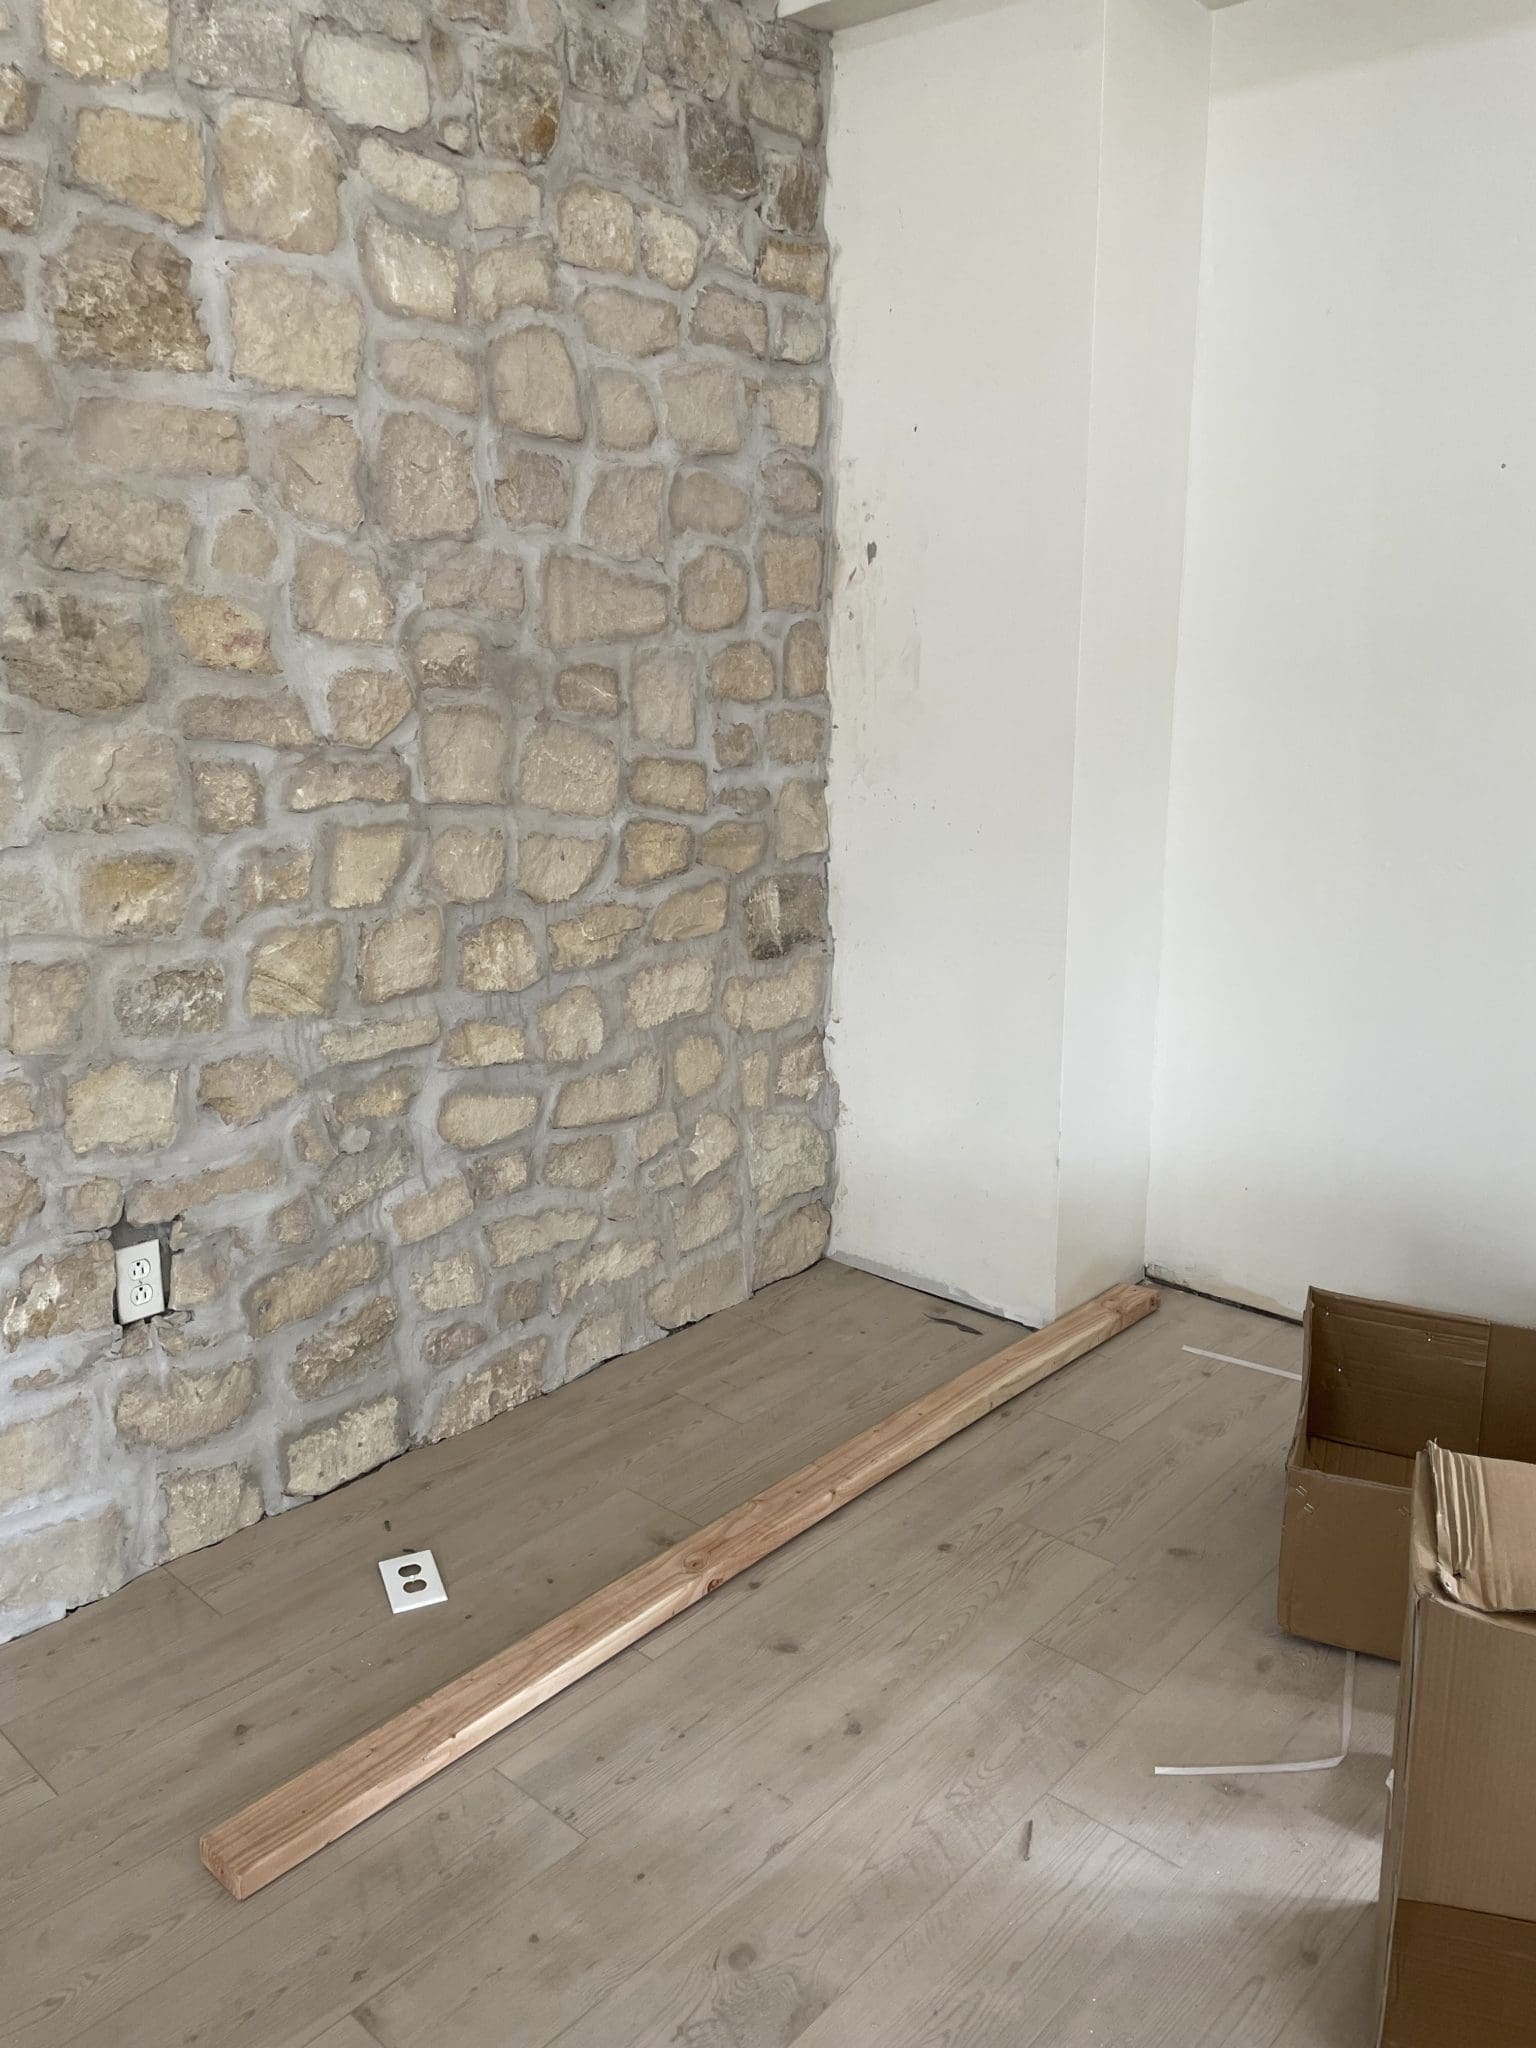 Limestone being installed on an indoor wall